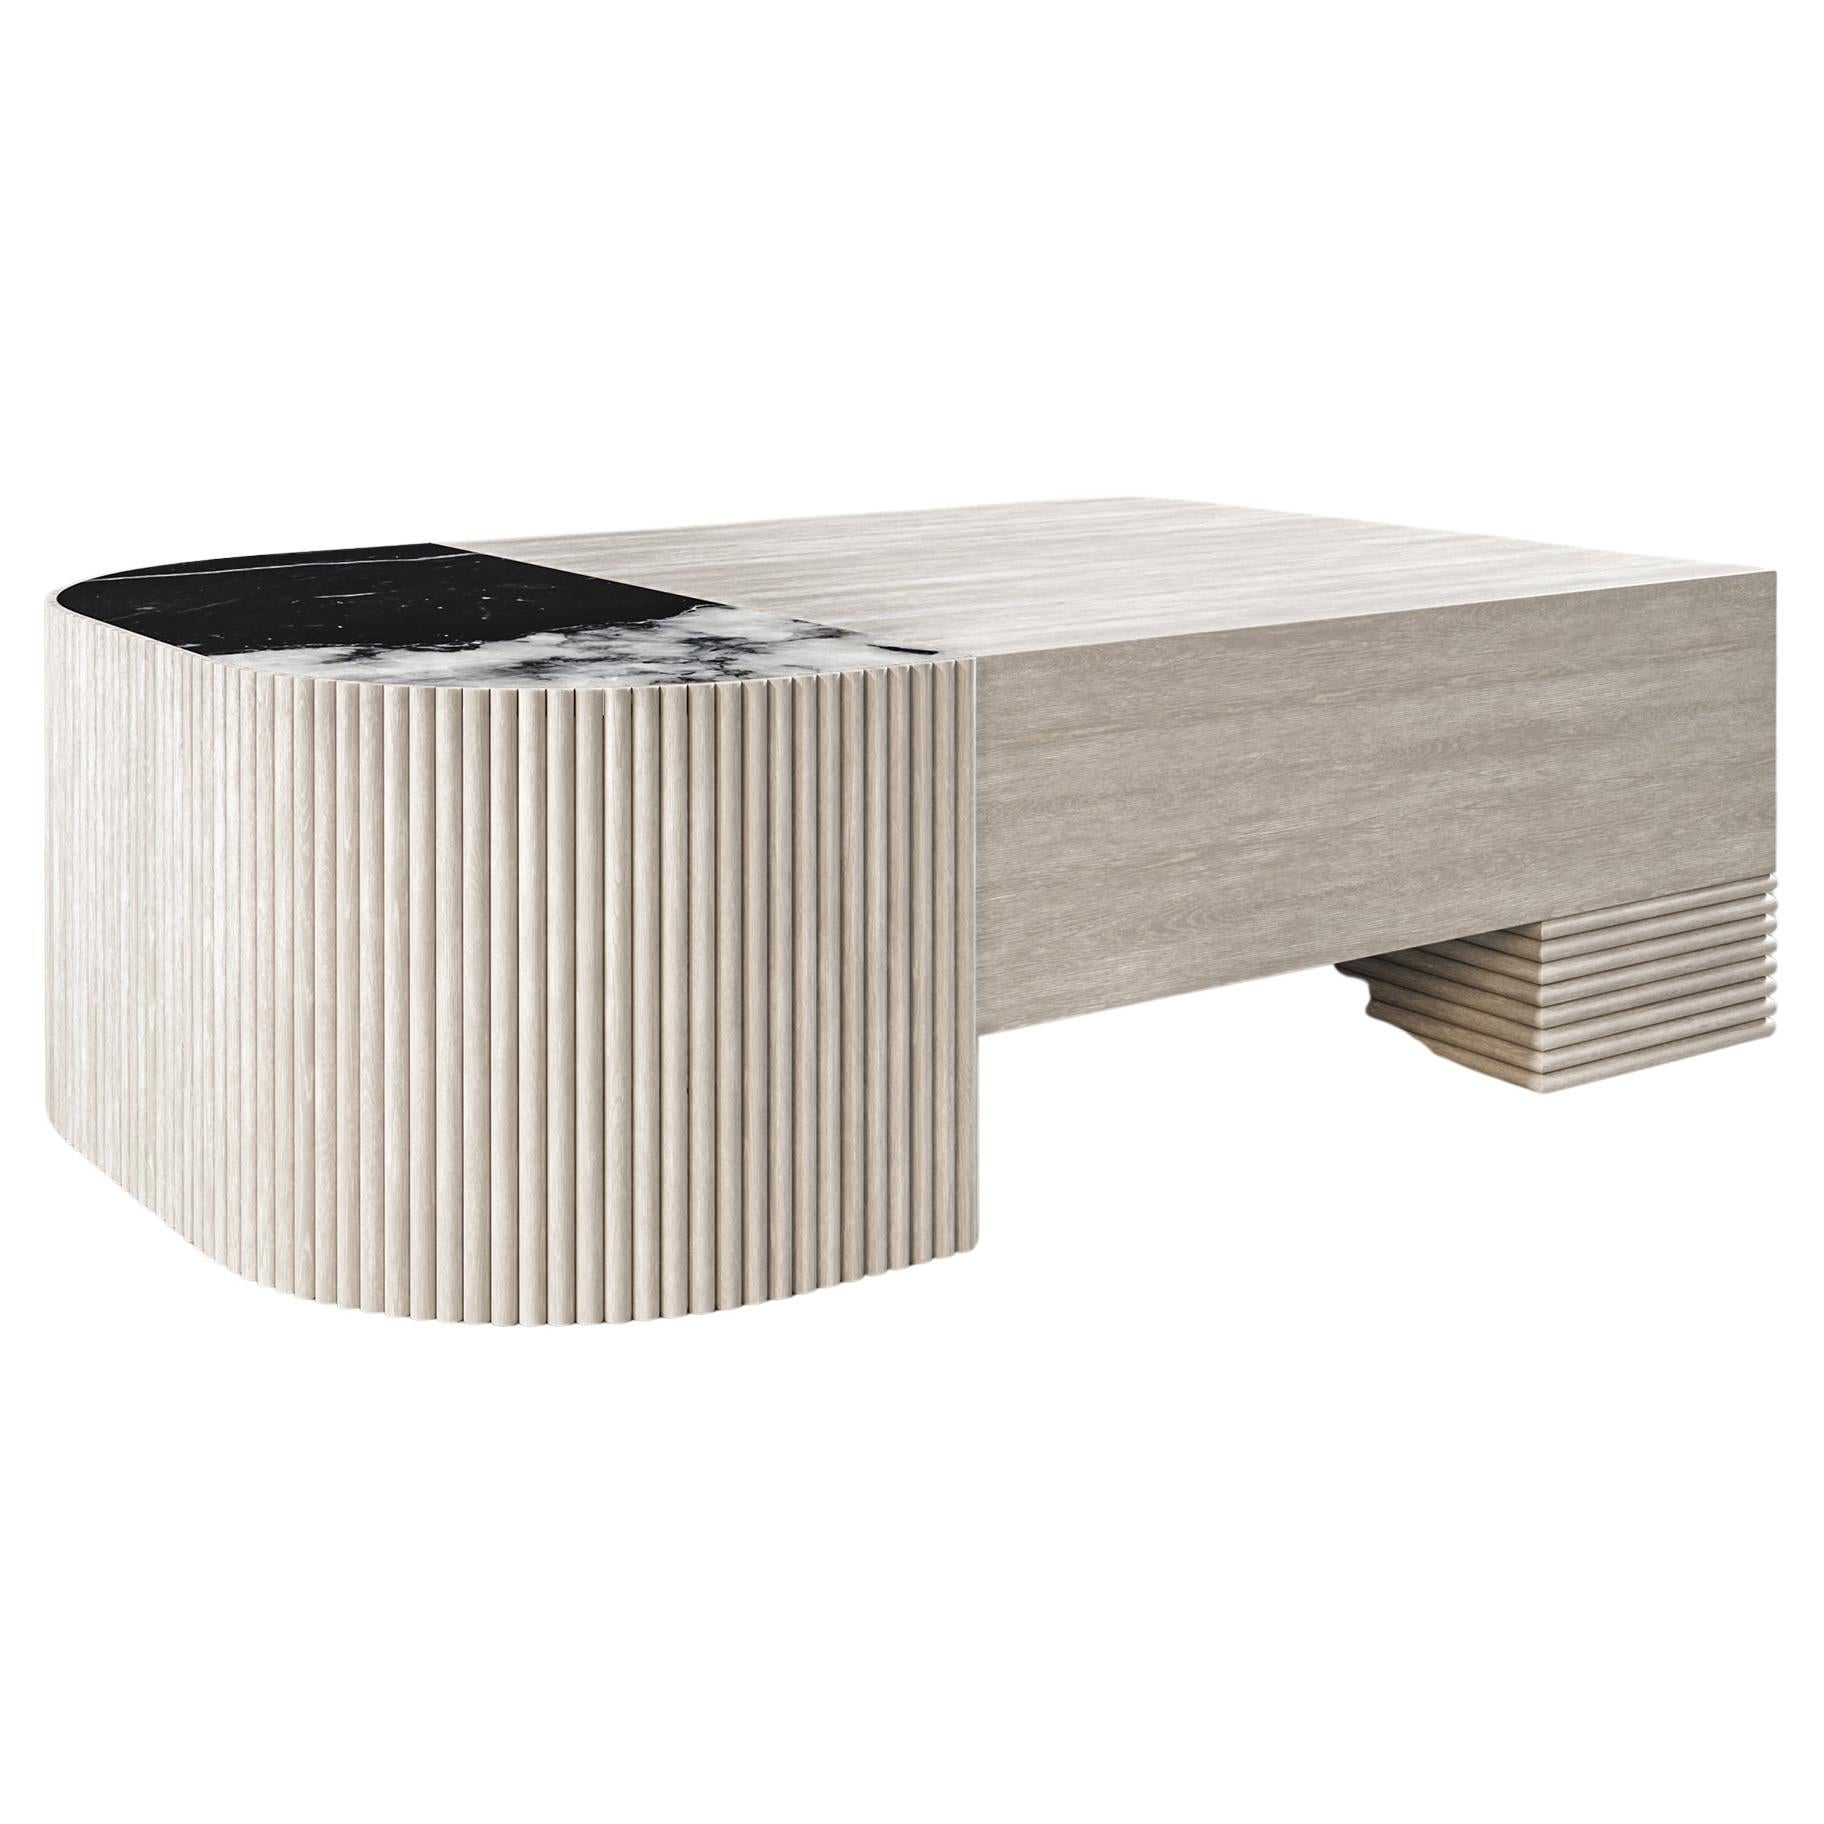 SWAY COFFEE TABLE - Modern Design with Sandy Oak + Nero Marquina Marble For Sale